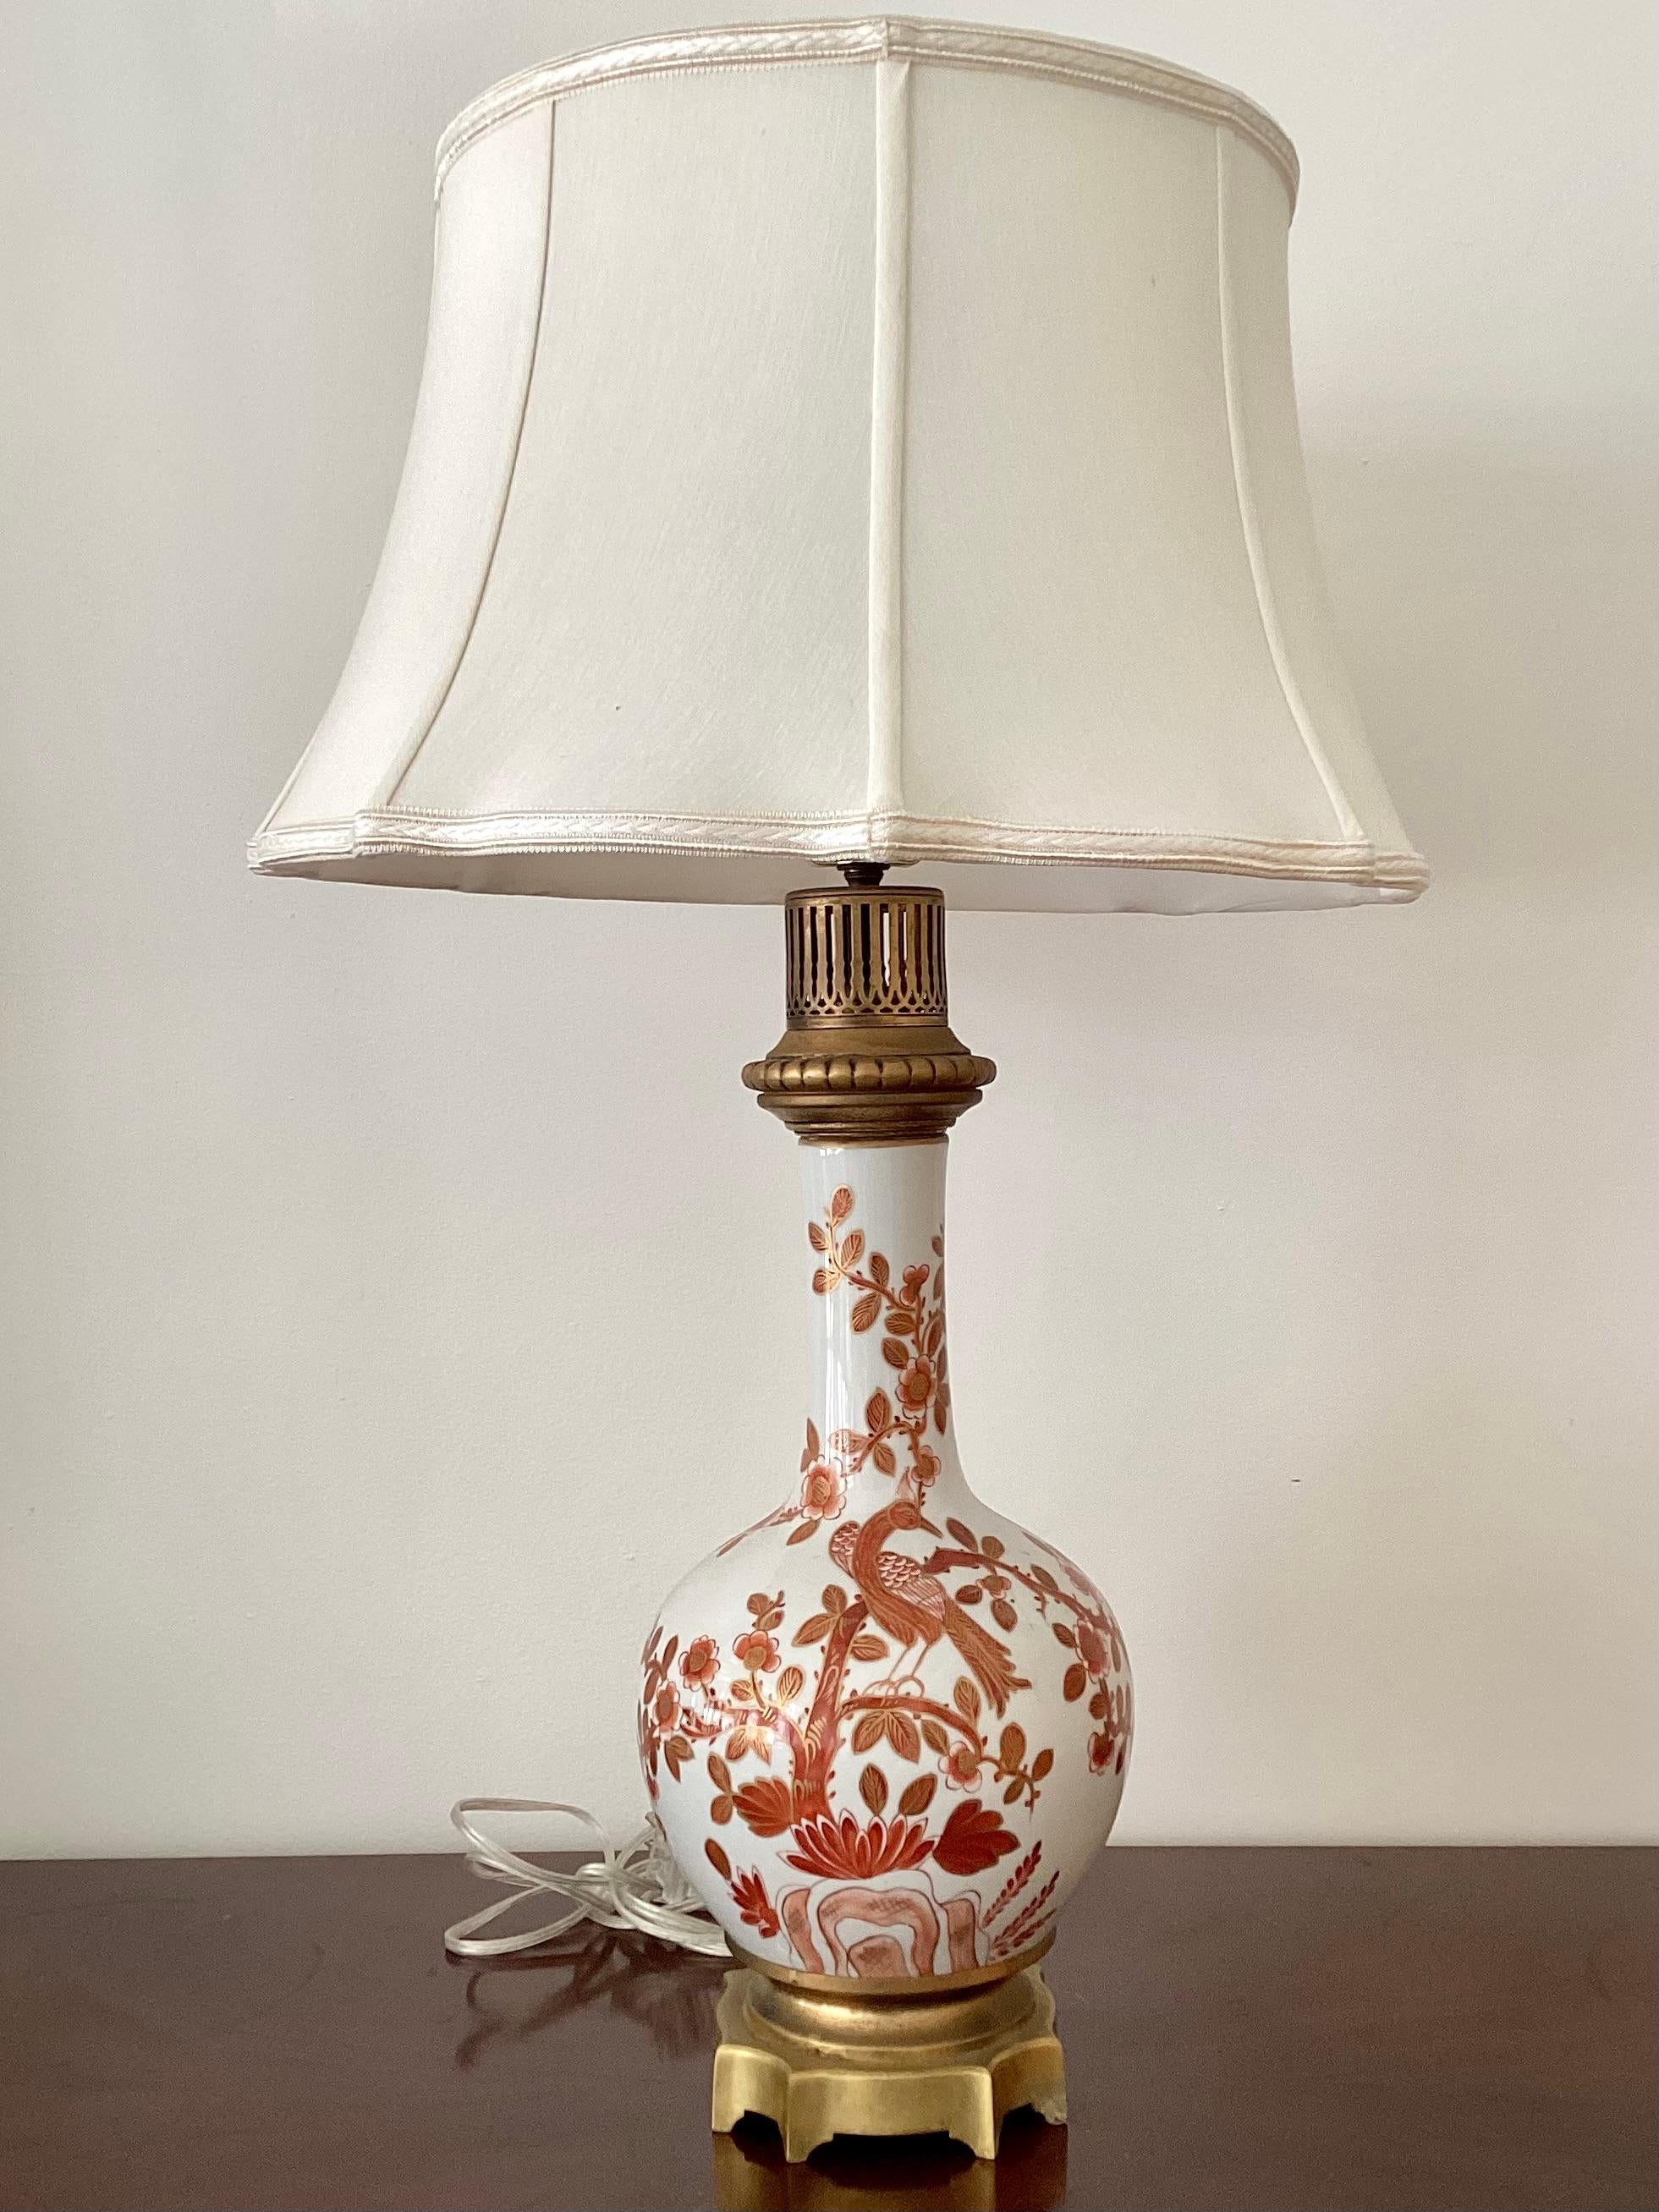 Single decorative vintage Asian lamp with nature scene of trees and bird. This lamp includes a sturdy gilt bronze base. Add this beautiful lamp to your chinoiserie collection.